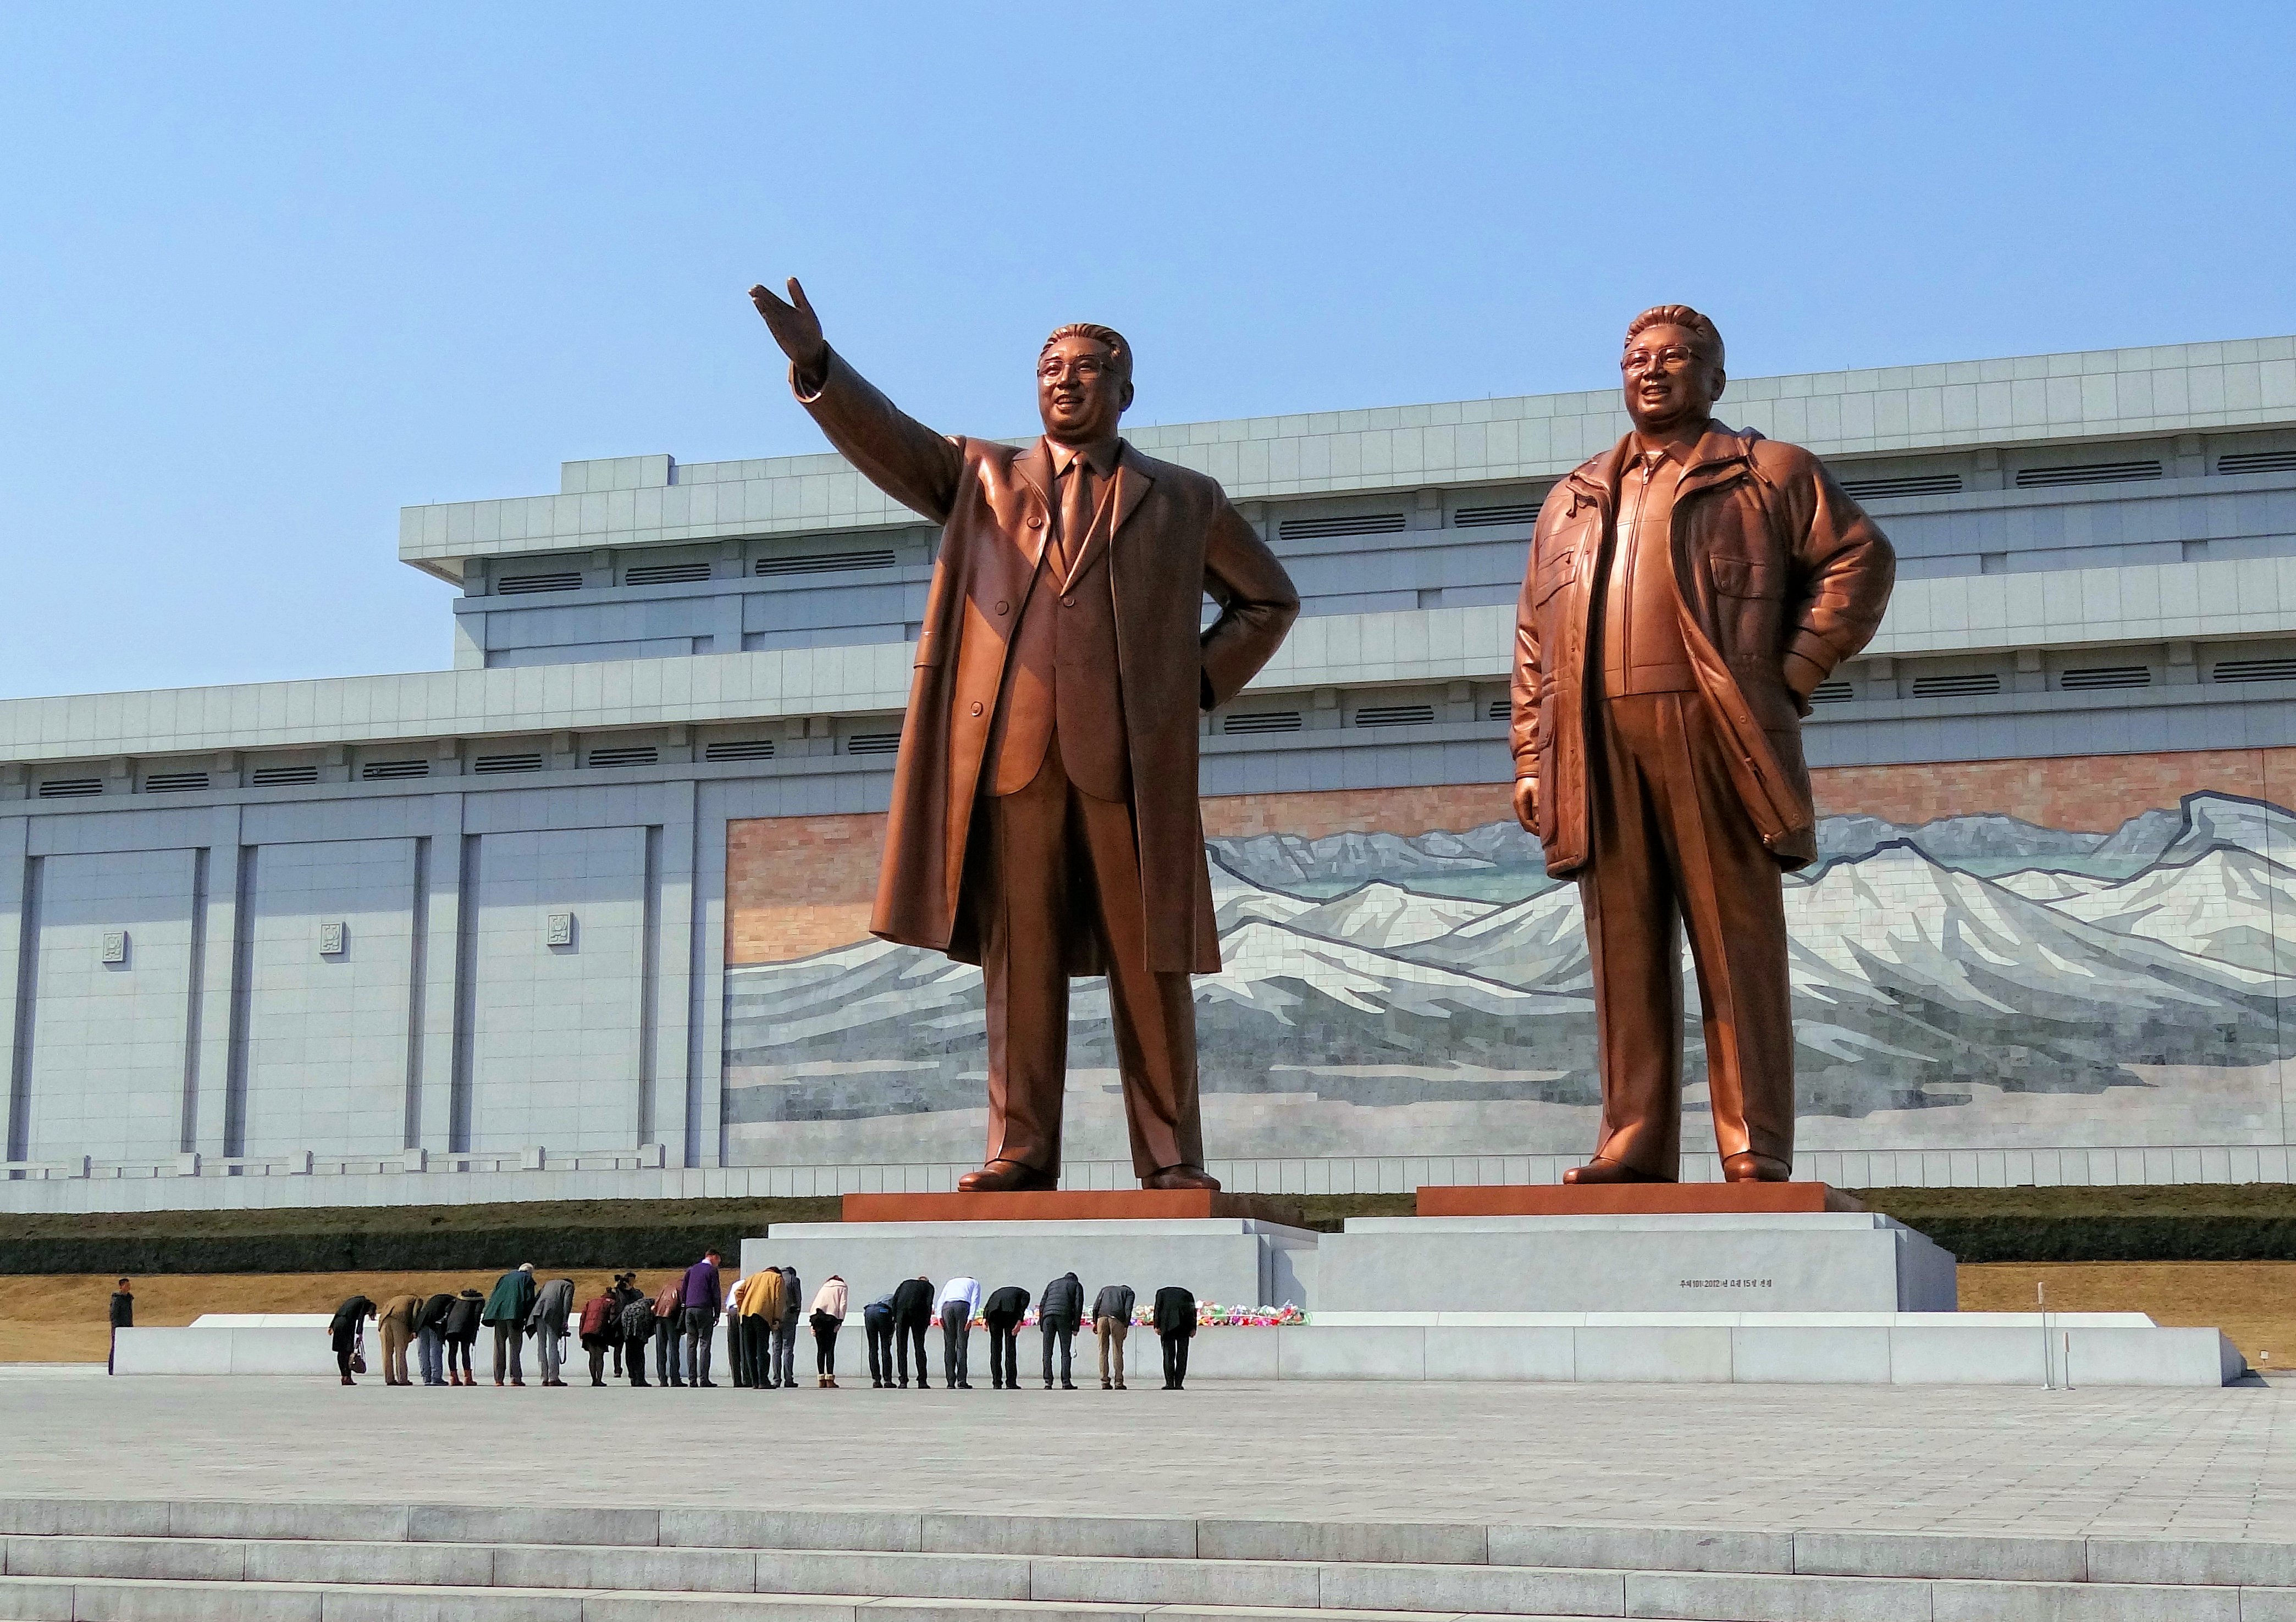 Visitors bowing before statues of North Korean leaders Kim Il-sung and Kim Jong-il in Pyongyang, North Korea, 2014.